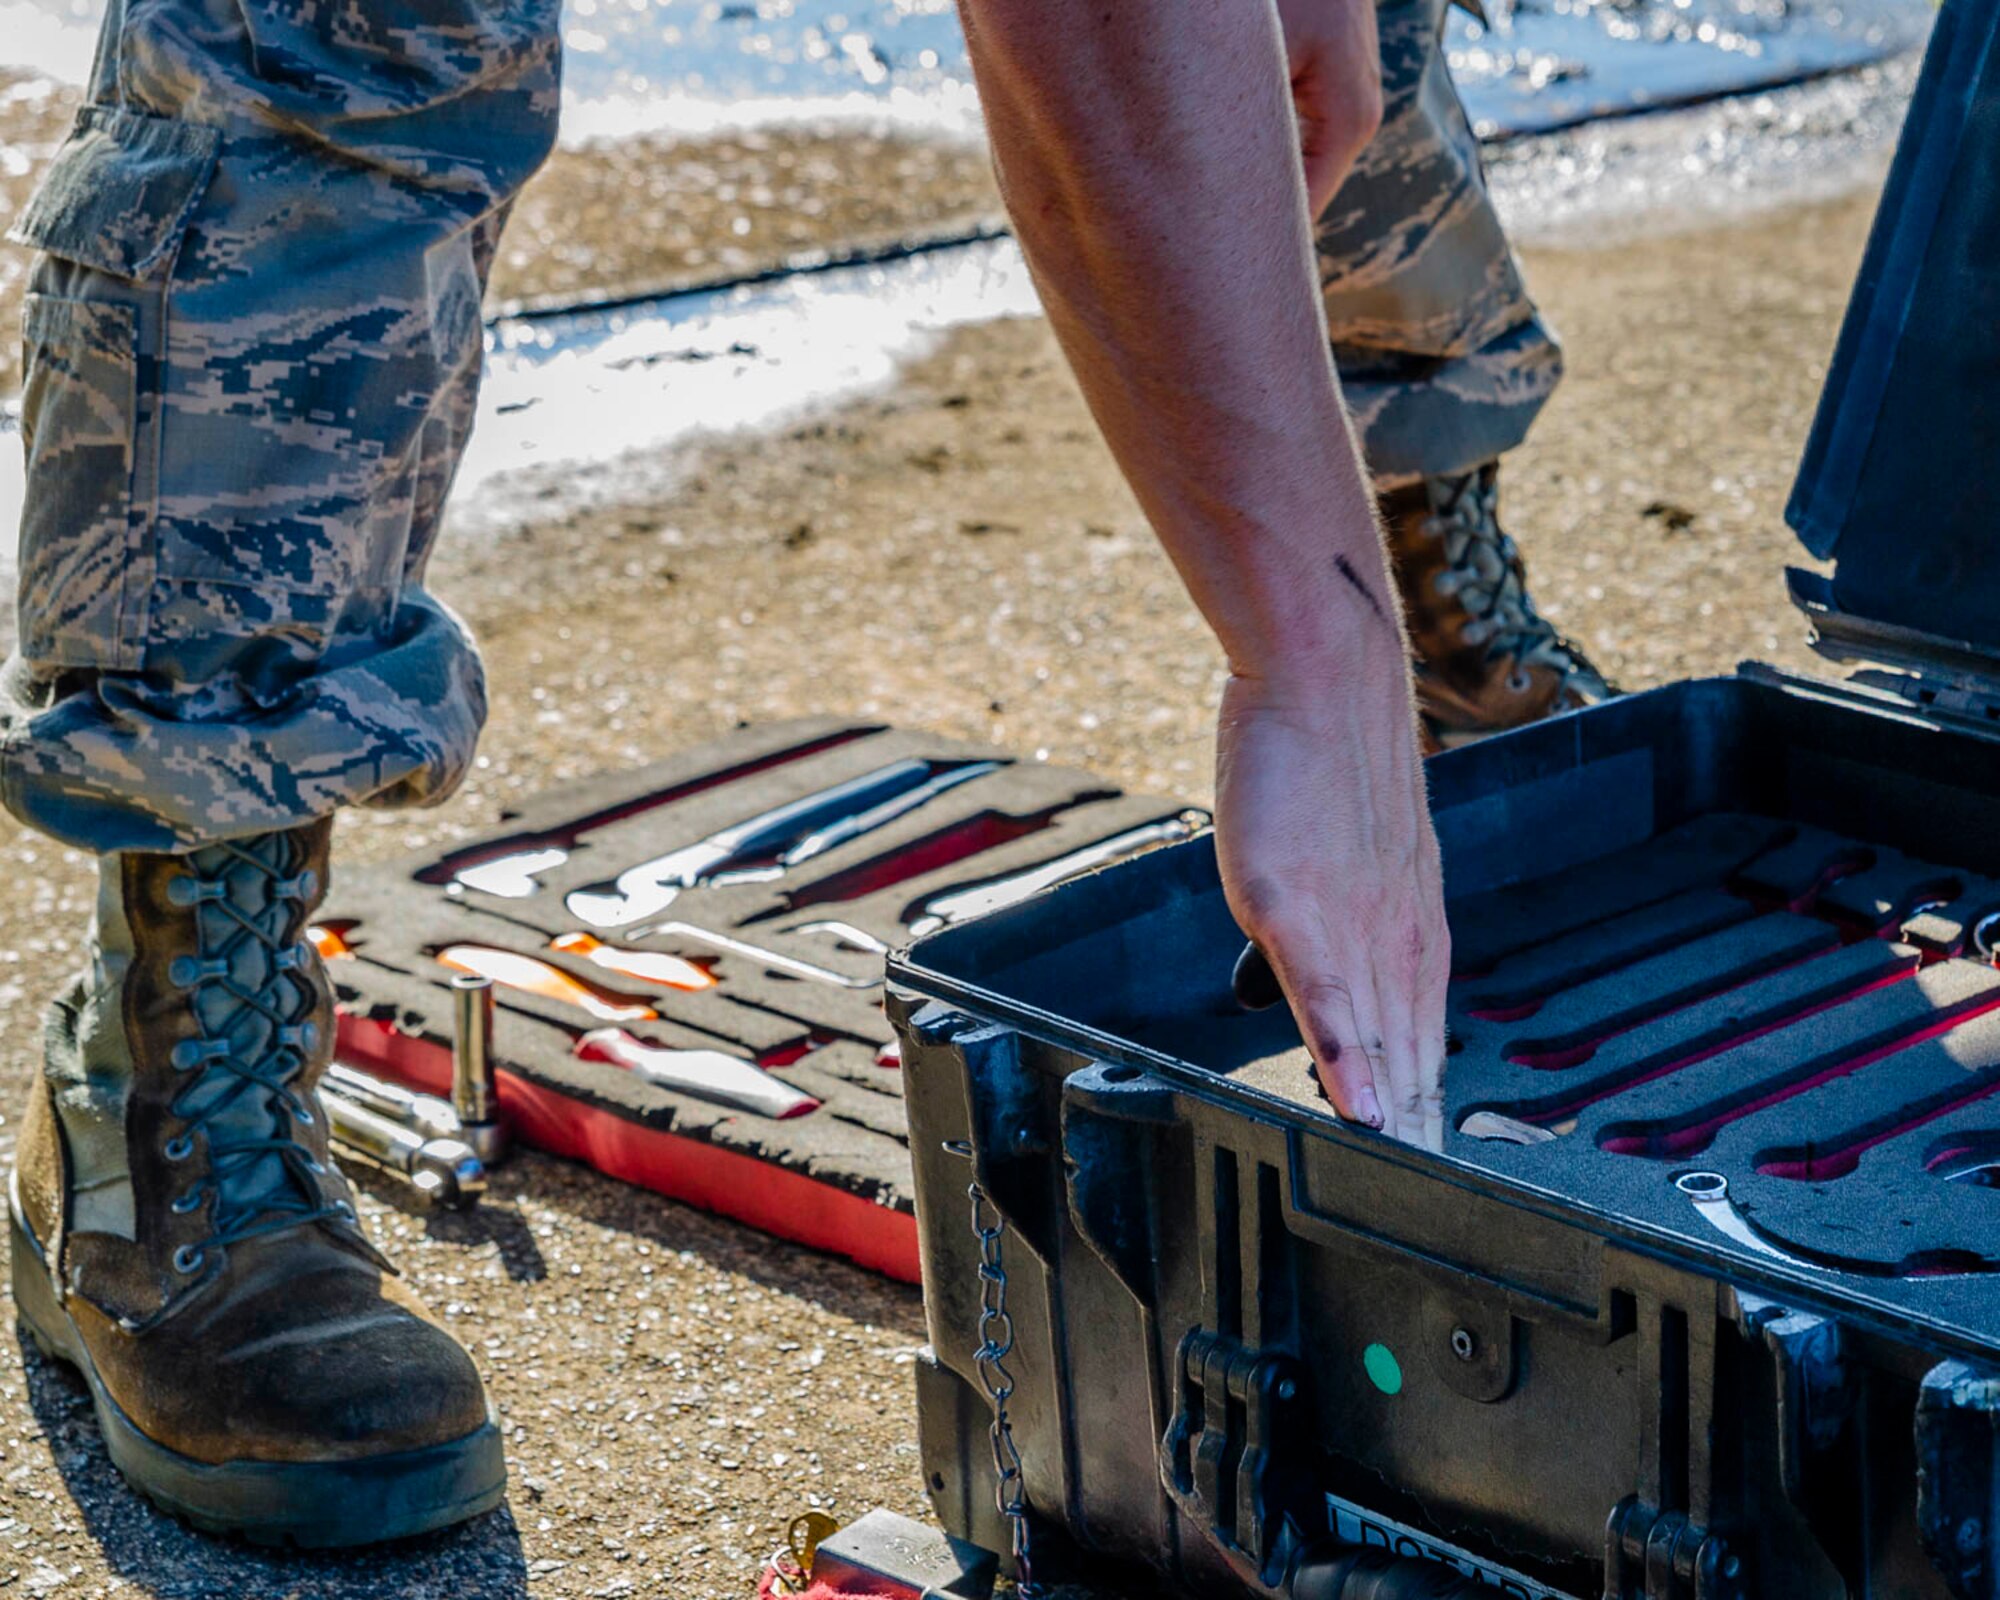 Air Force Reserve Airman from the 913th Maintenance Squadron looks for a tool to troubleshoot the landing gear of a C-130J Hercules on August 15, 2019, at Little Rock Air Force Base, Ark.  There are 20 Reserve members who work with Team Little Rock maintenance personnel to ensure combat airlift is available. Mobility aircraft, such as the C-130J, deliver critical personnel and cargo and provide airdrop of time-sensitive supplies, food and ammunition on a global scale. A critical part of the airlift capabilities are the efforts of the maintenance personnel who ensure the workhorse of the mobility force, the C-130, is always ready, always there! (U.S. Air Force Reserve photo by Maj. Ashley Walker)